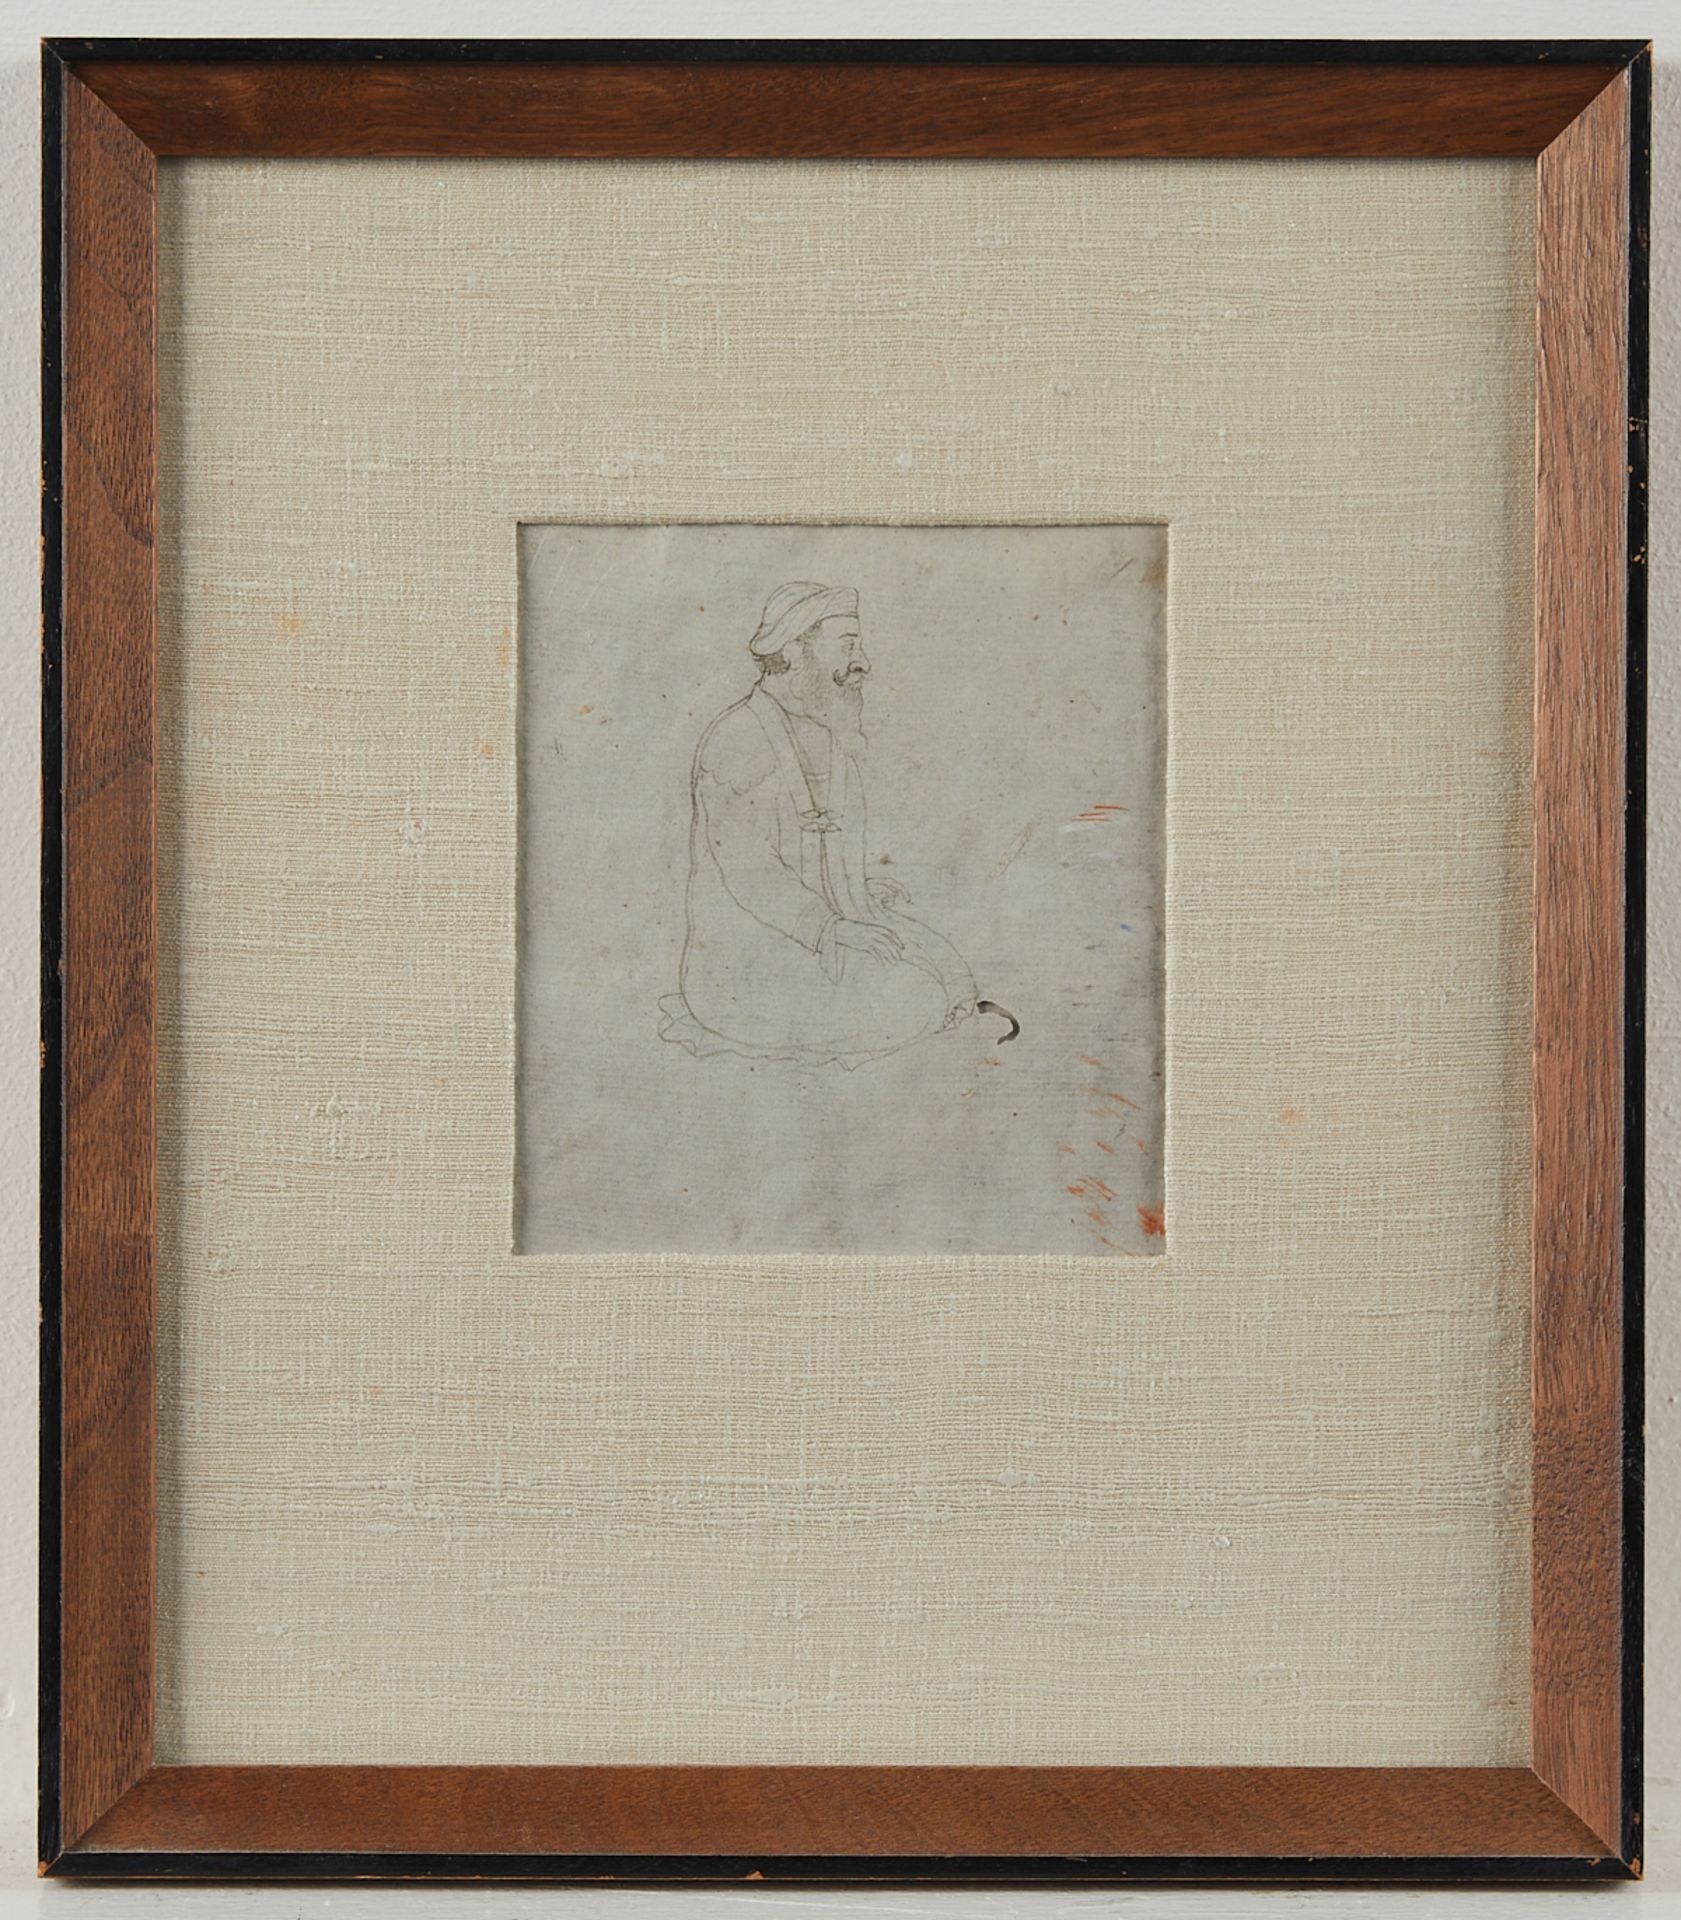 18th/19th c. Indian Portrait Drawing - Image 2 of 4